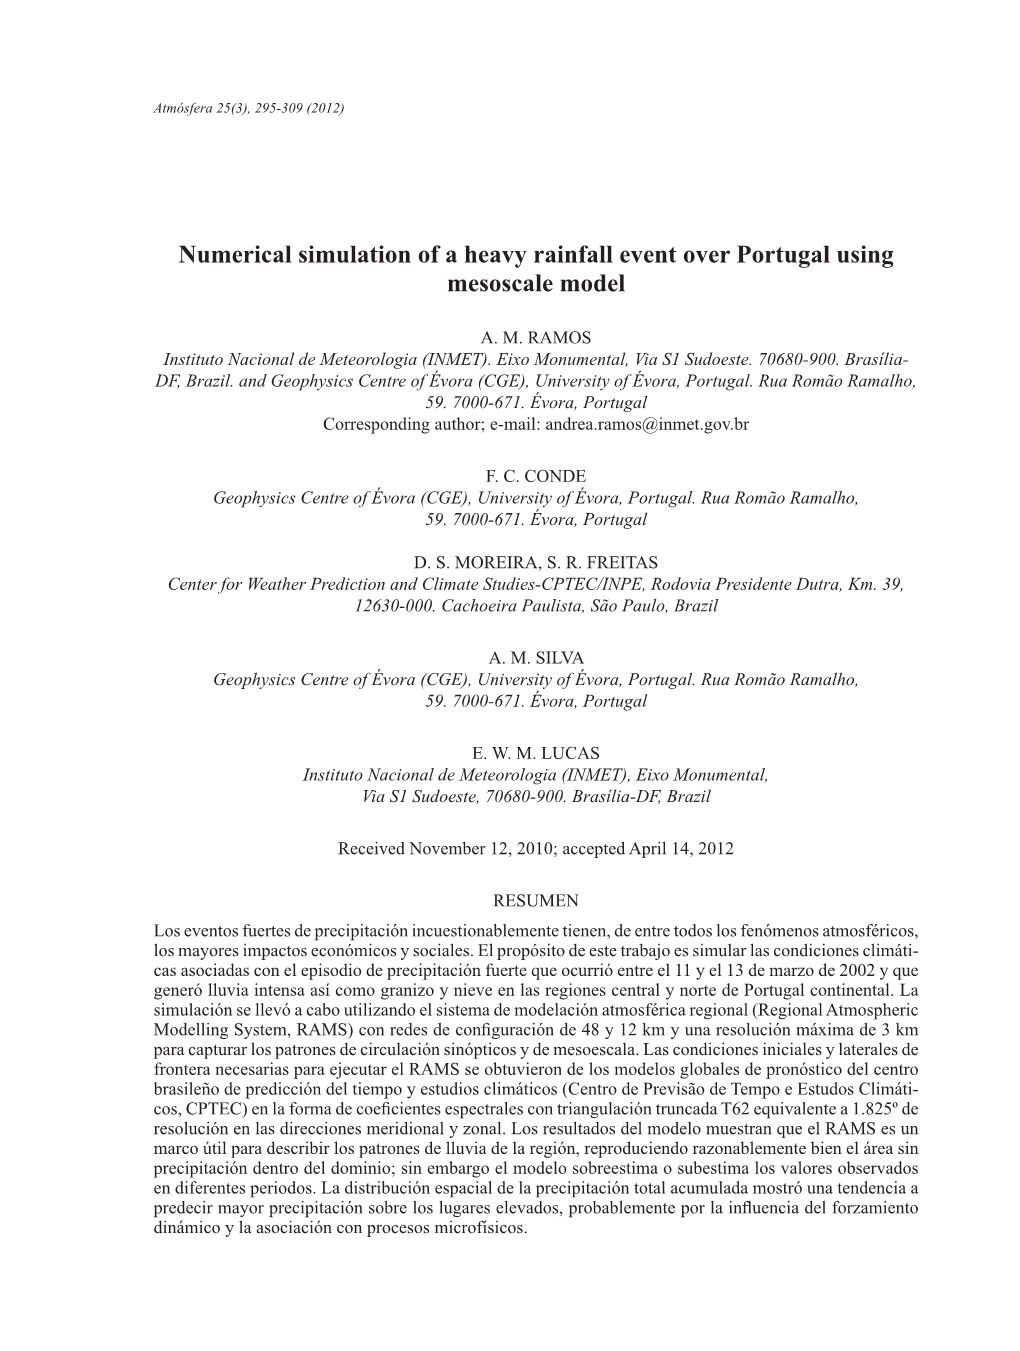 Numerical Simulation of a Heavy Rainfall Event Over Portugal Using Mesoscale Model